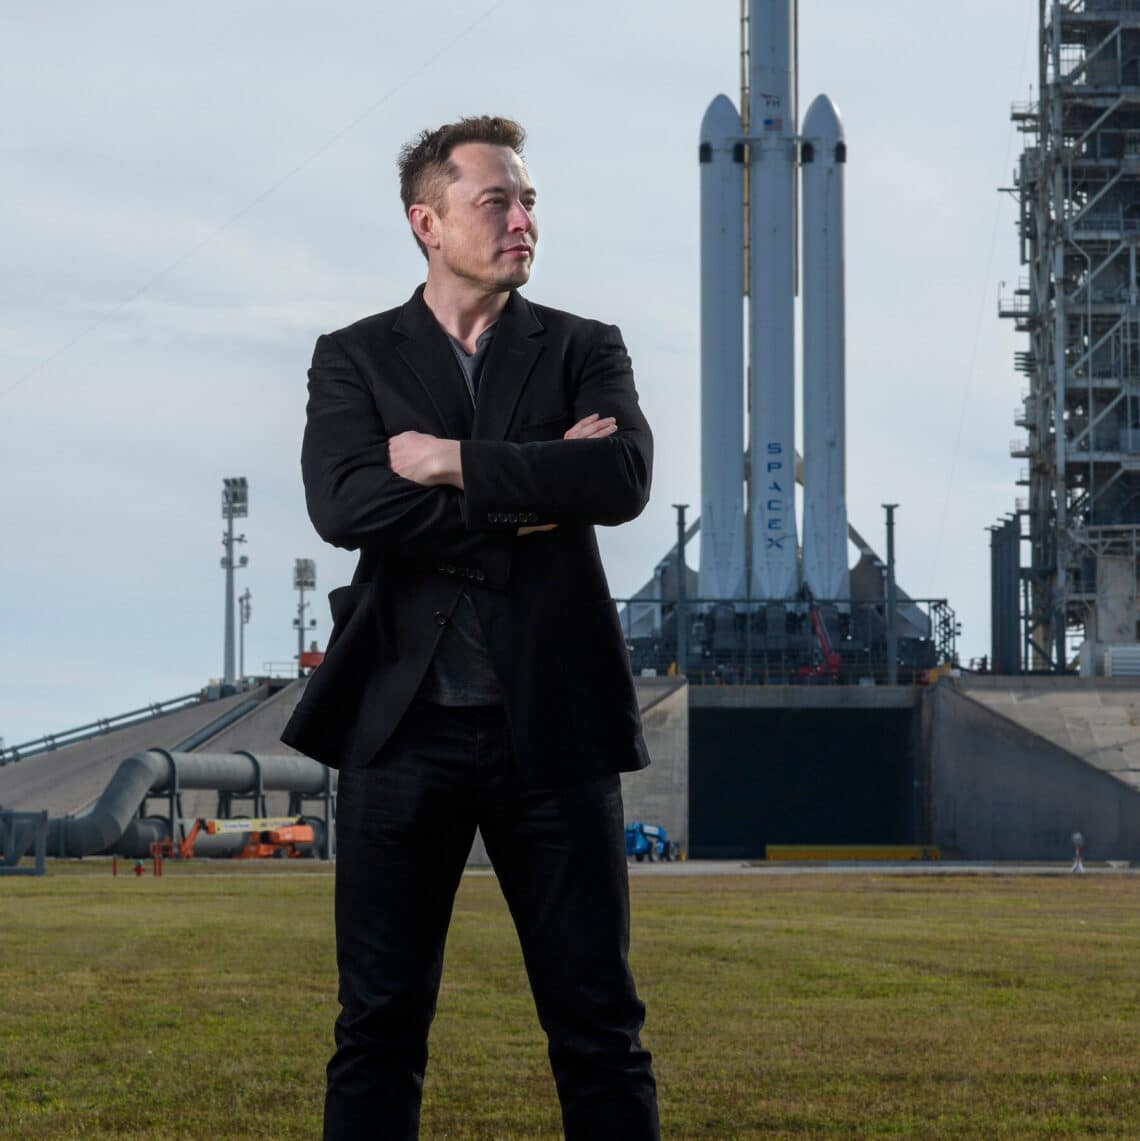 SpaceX’s All Civilian Mission: Everything You Need To Know About The Historic Trip To Space